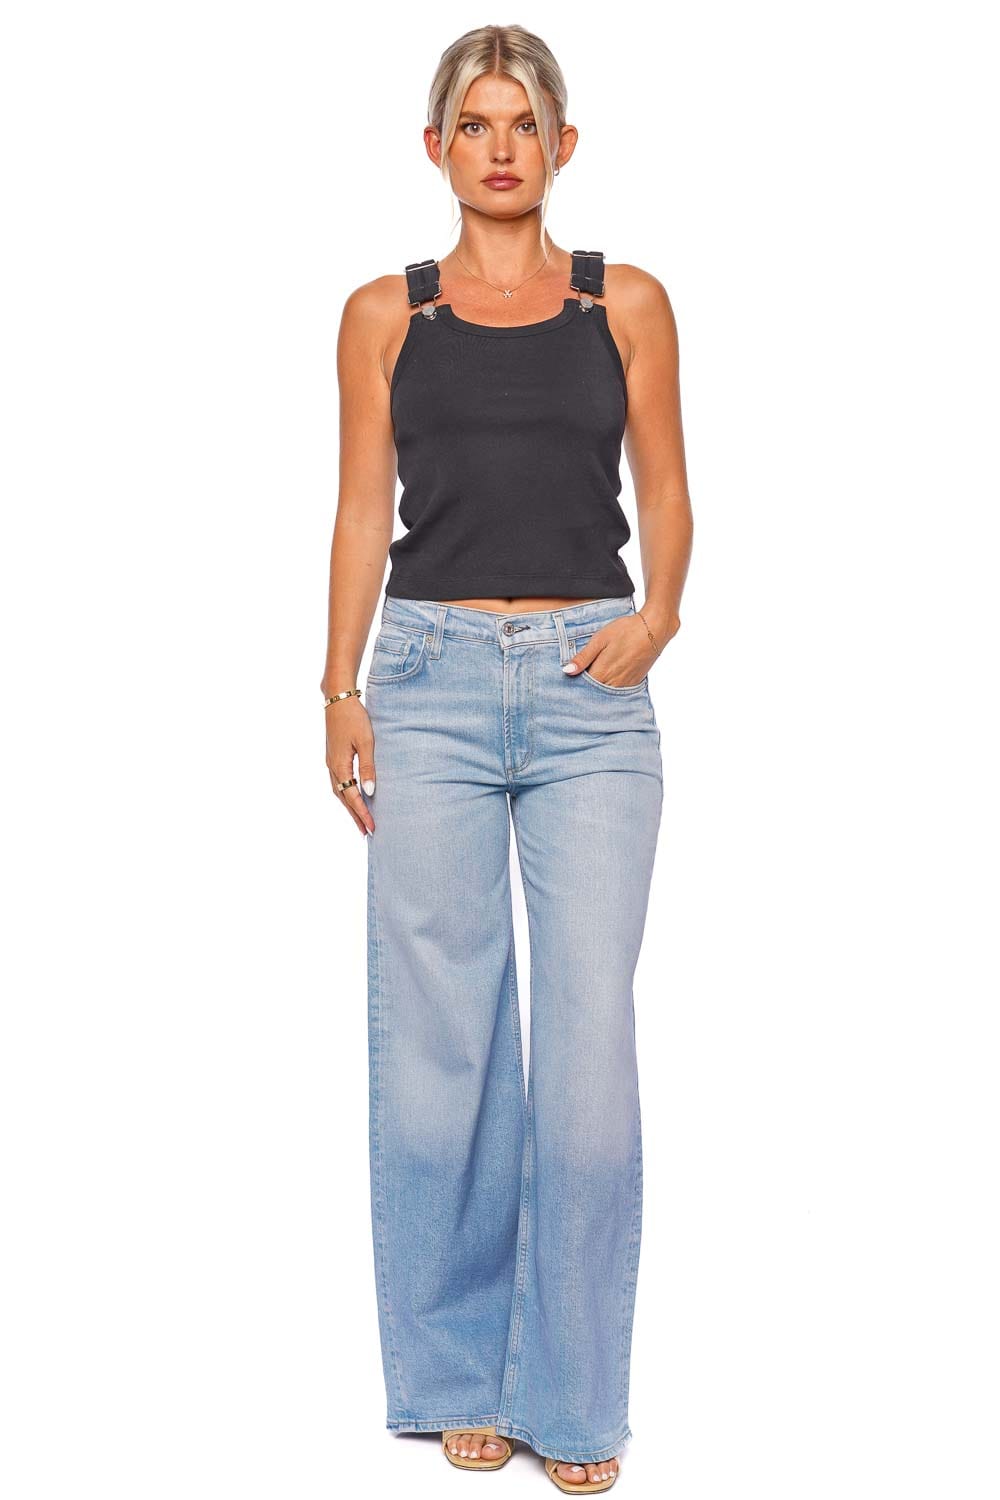 Citizens of Humanity Lolli Mid Rise Baggy Jean 2084B-1573 Neroli